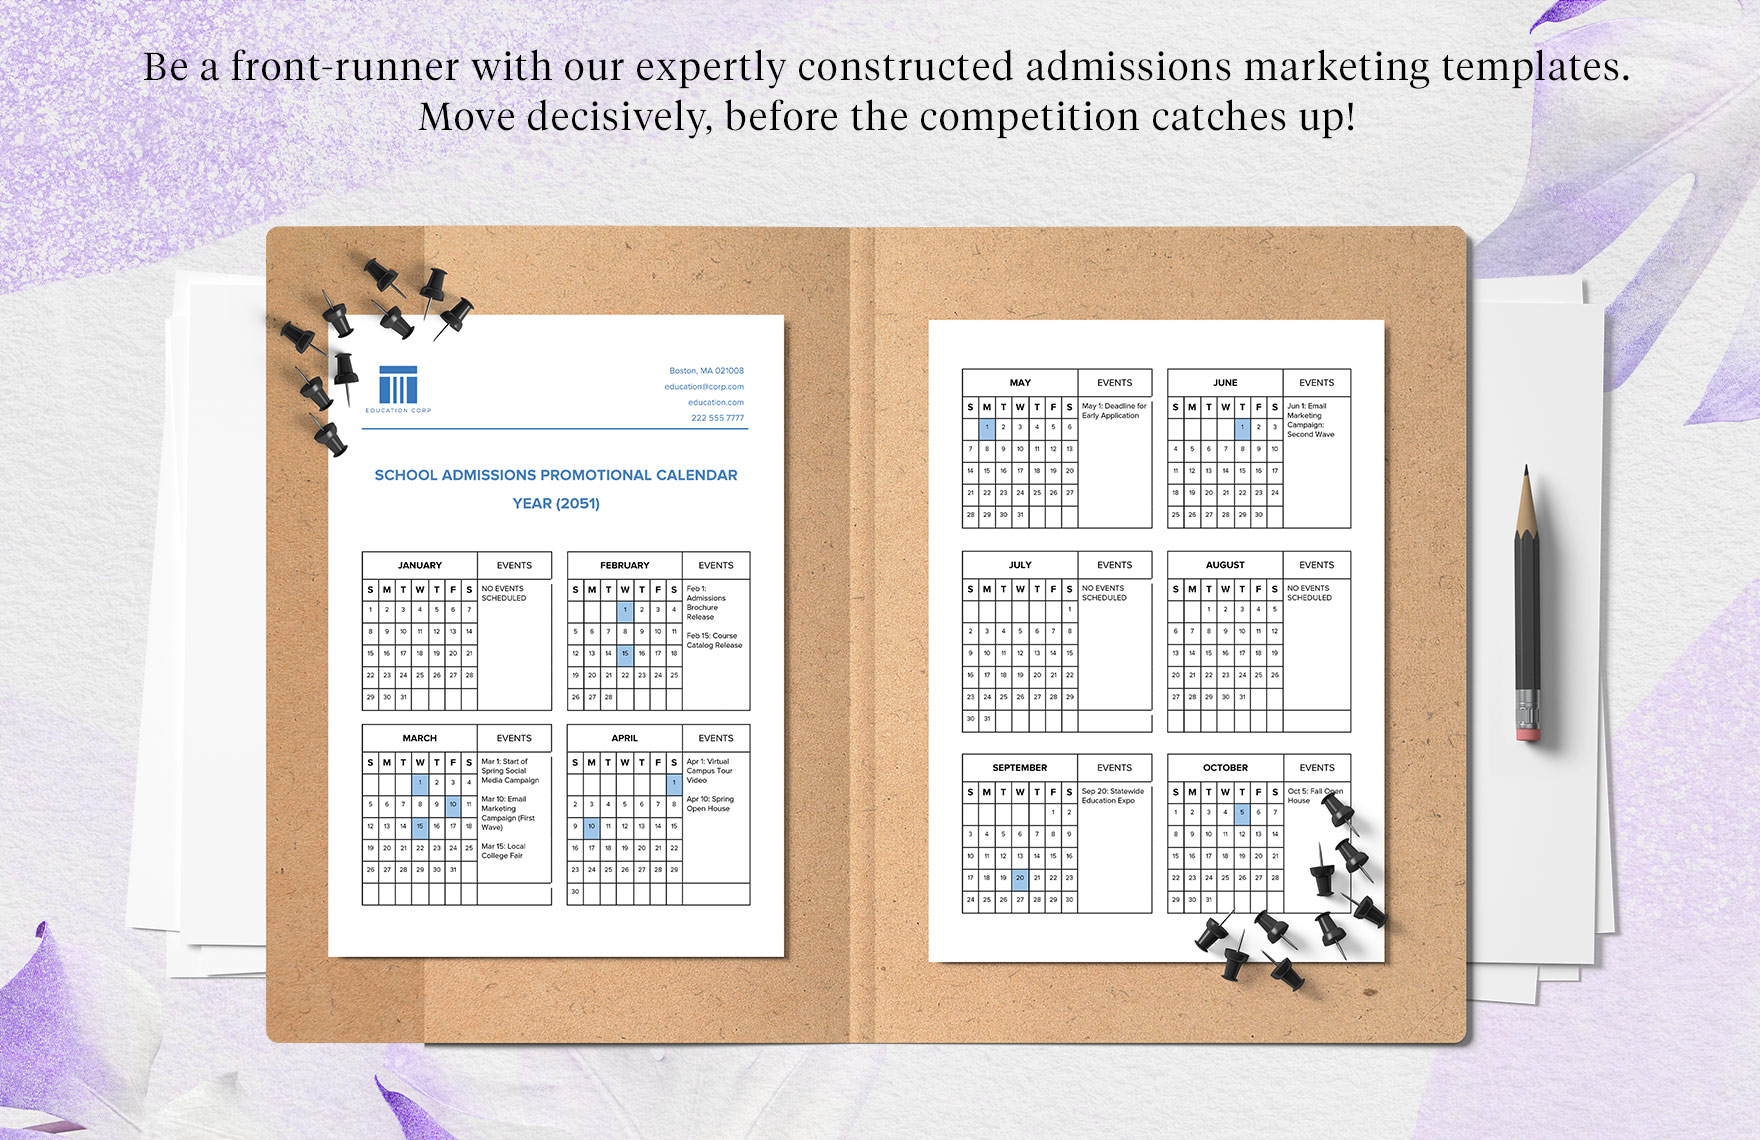 School Admissions Promotional Calendar Template